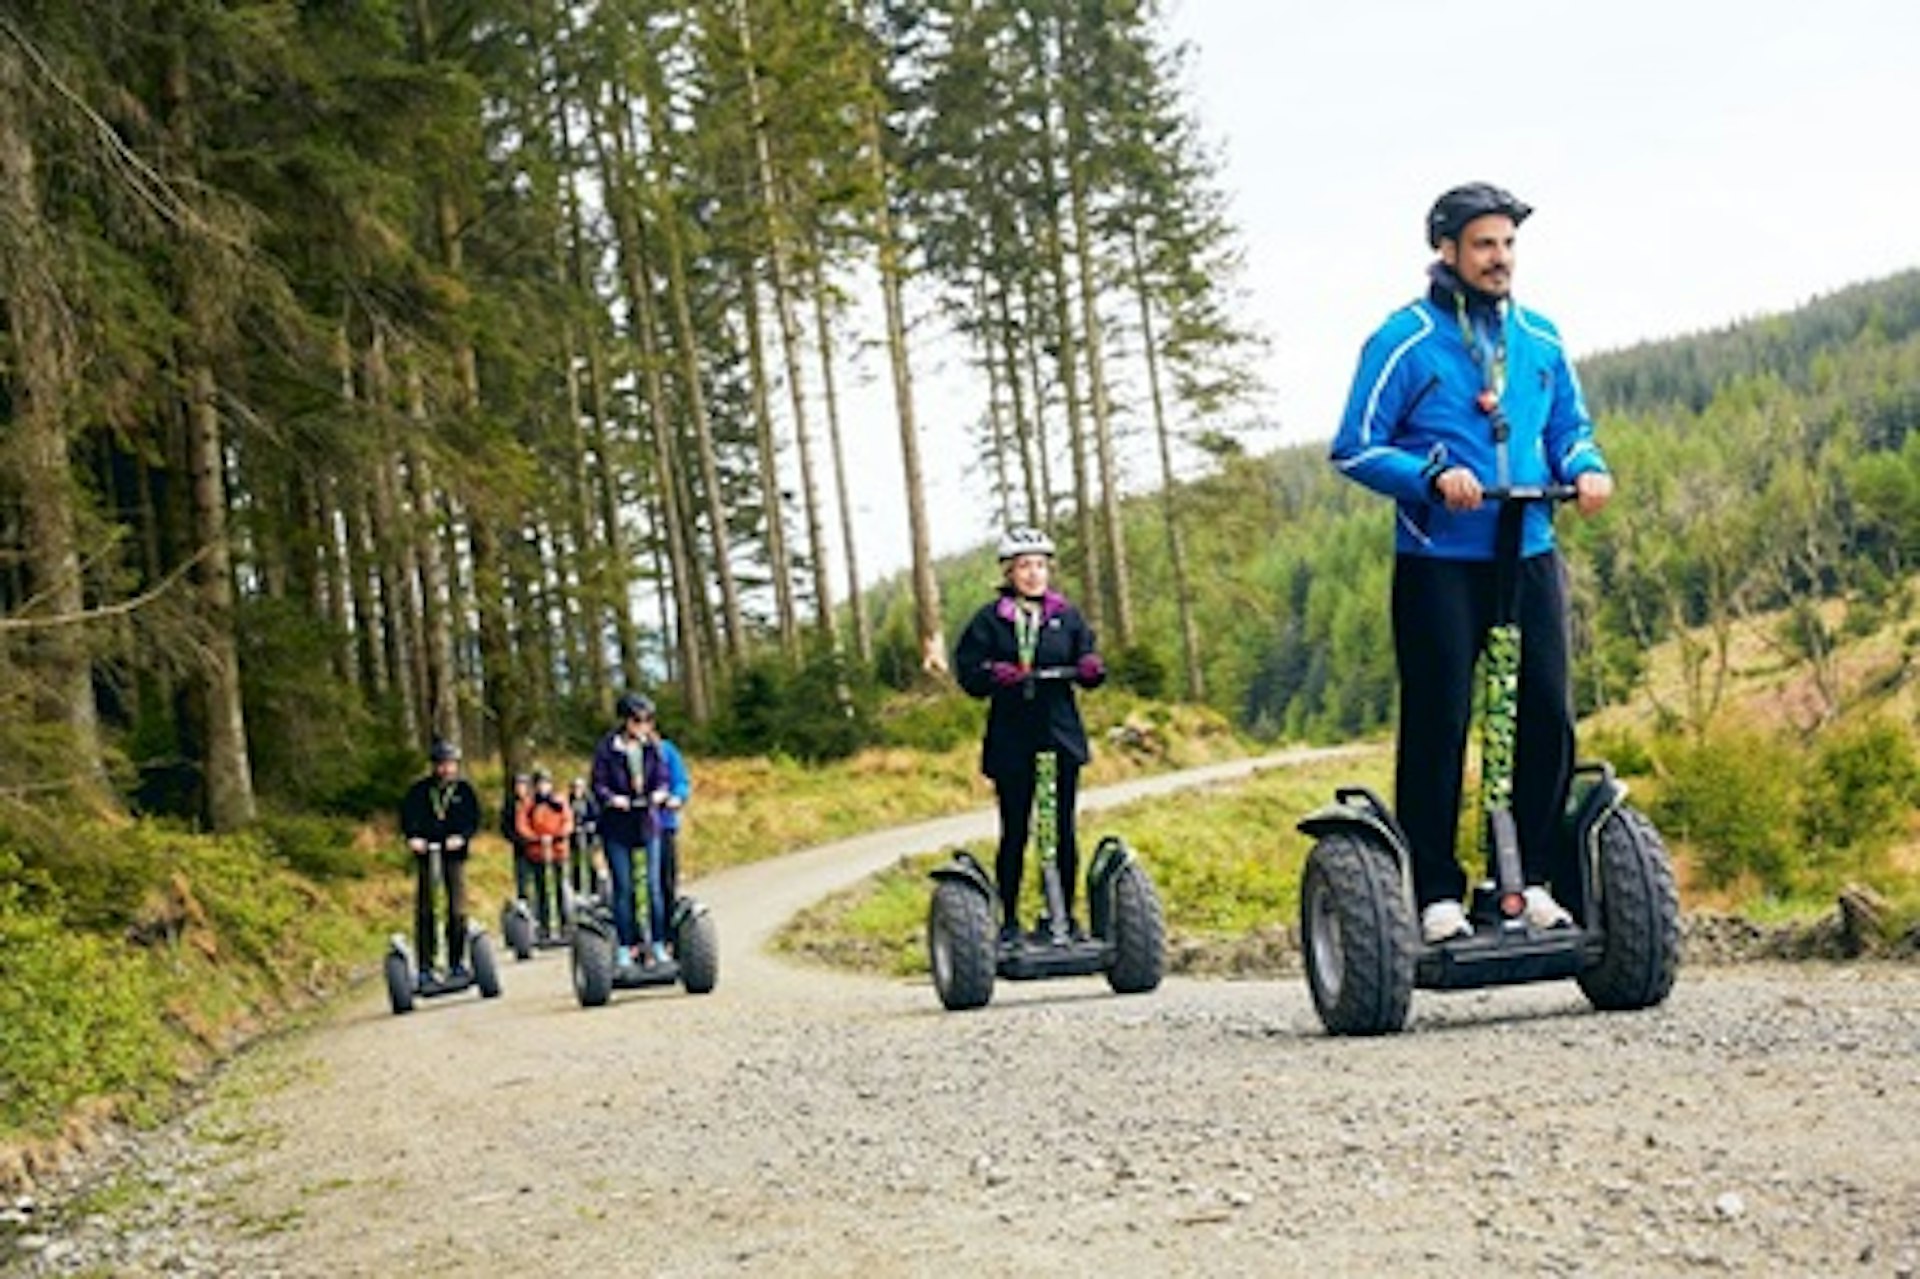 Forest Segway Adventure for Two with Go Ape 2